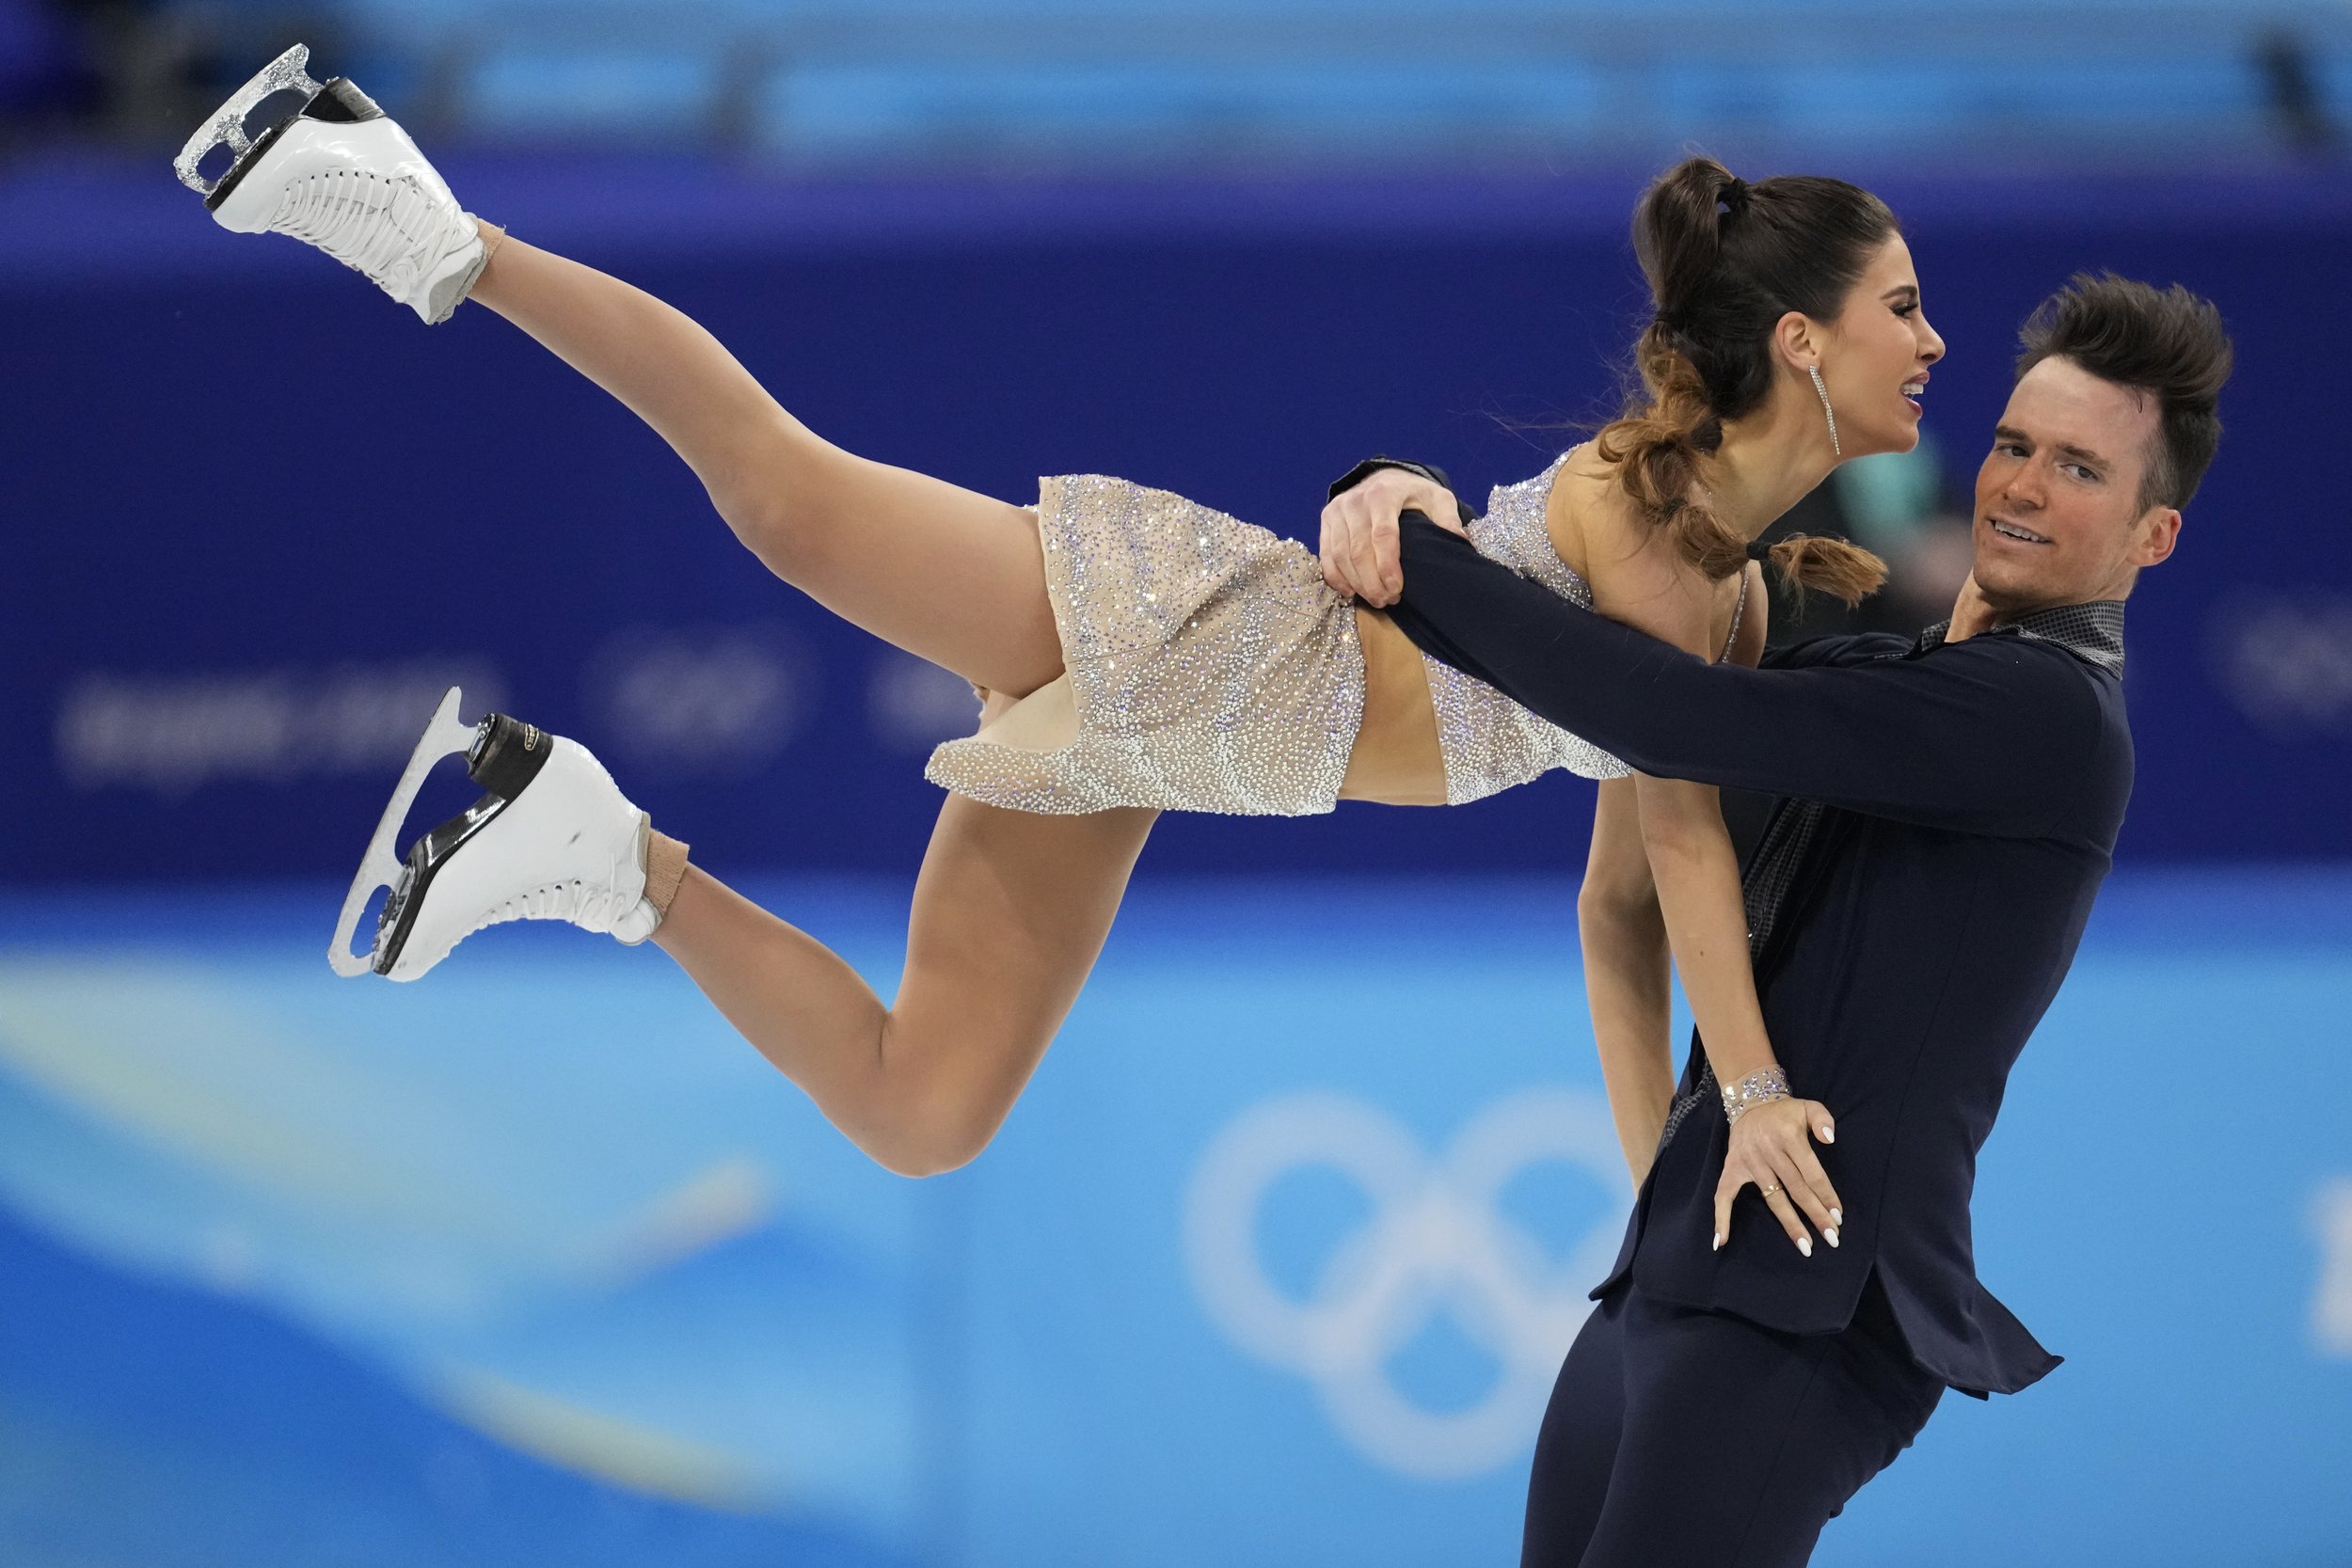  Tina Garabedian and Simon Proulx Senecal, of Armenia, perform their routine in the ice dance competition during figure skating at the 2022 Winter Olympics, Saturday, Feb. 12, 2022, in Beijing. (AP Photo/Natacha Pisarenko) 